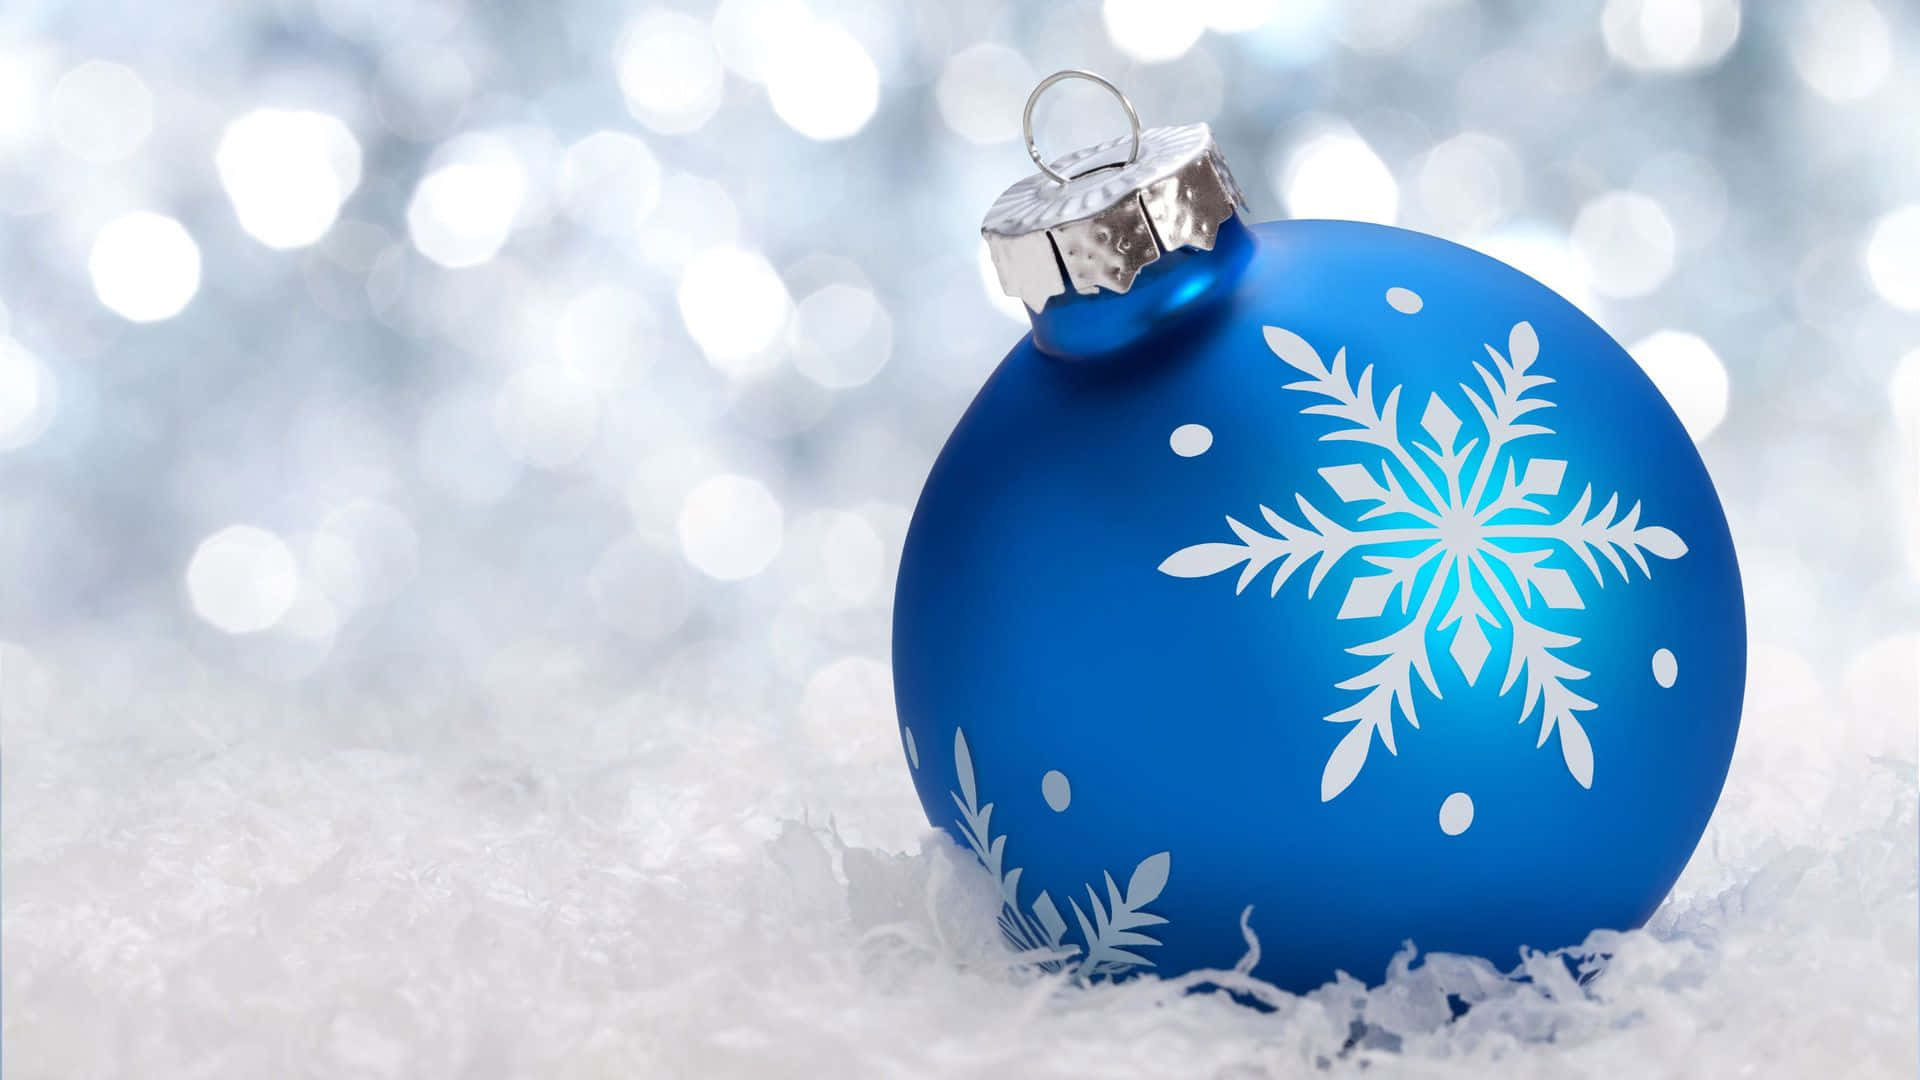 Christmas Blue Ball Ornaments Picture